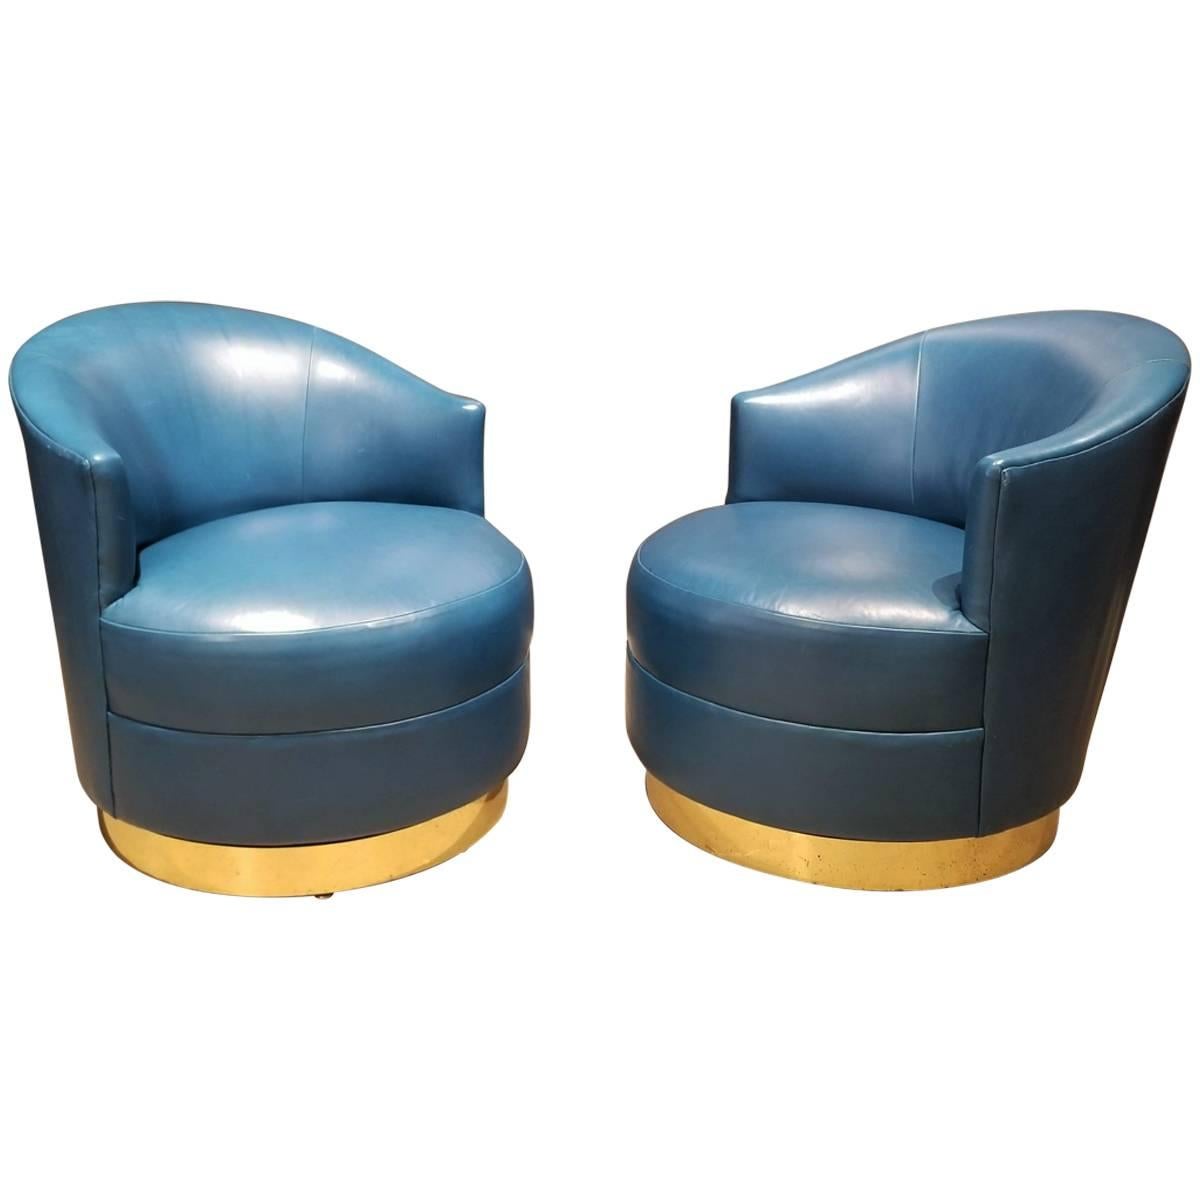 Opulent Swivel Chairs by Karl Springer in Brass and Original Teal Leather, Pair